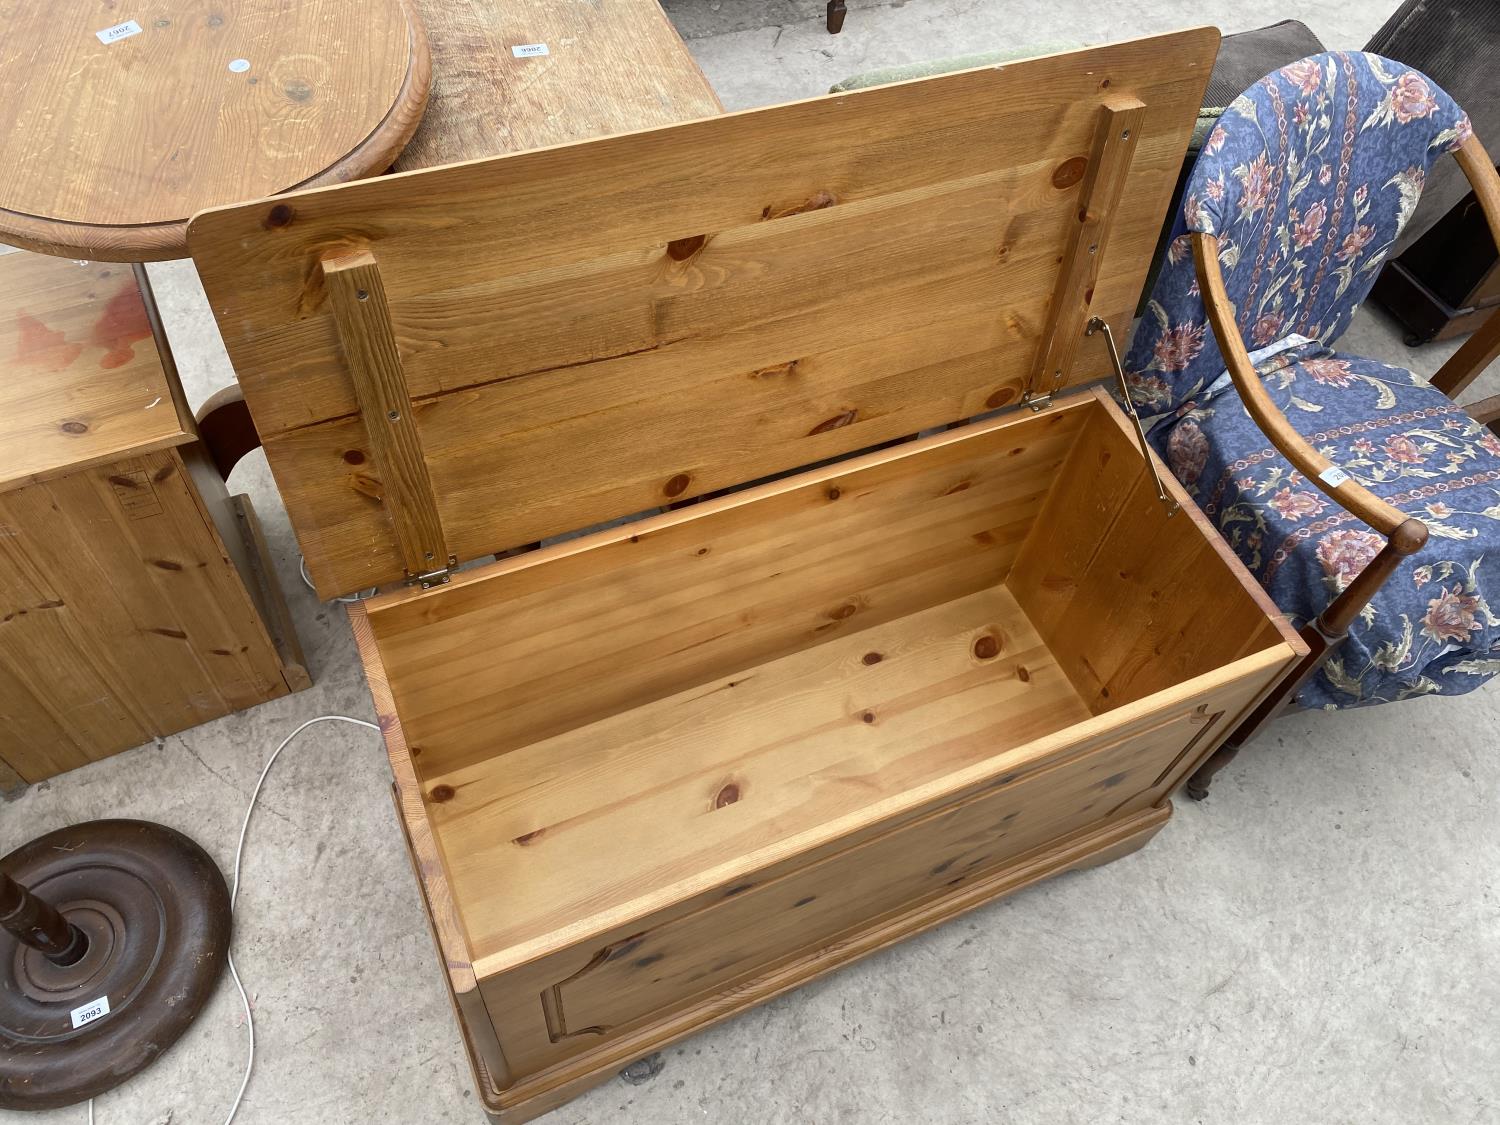 A MODERN PINE BLANKET CHEST, 36" WIDE - Image 2 of 4